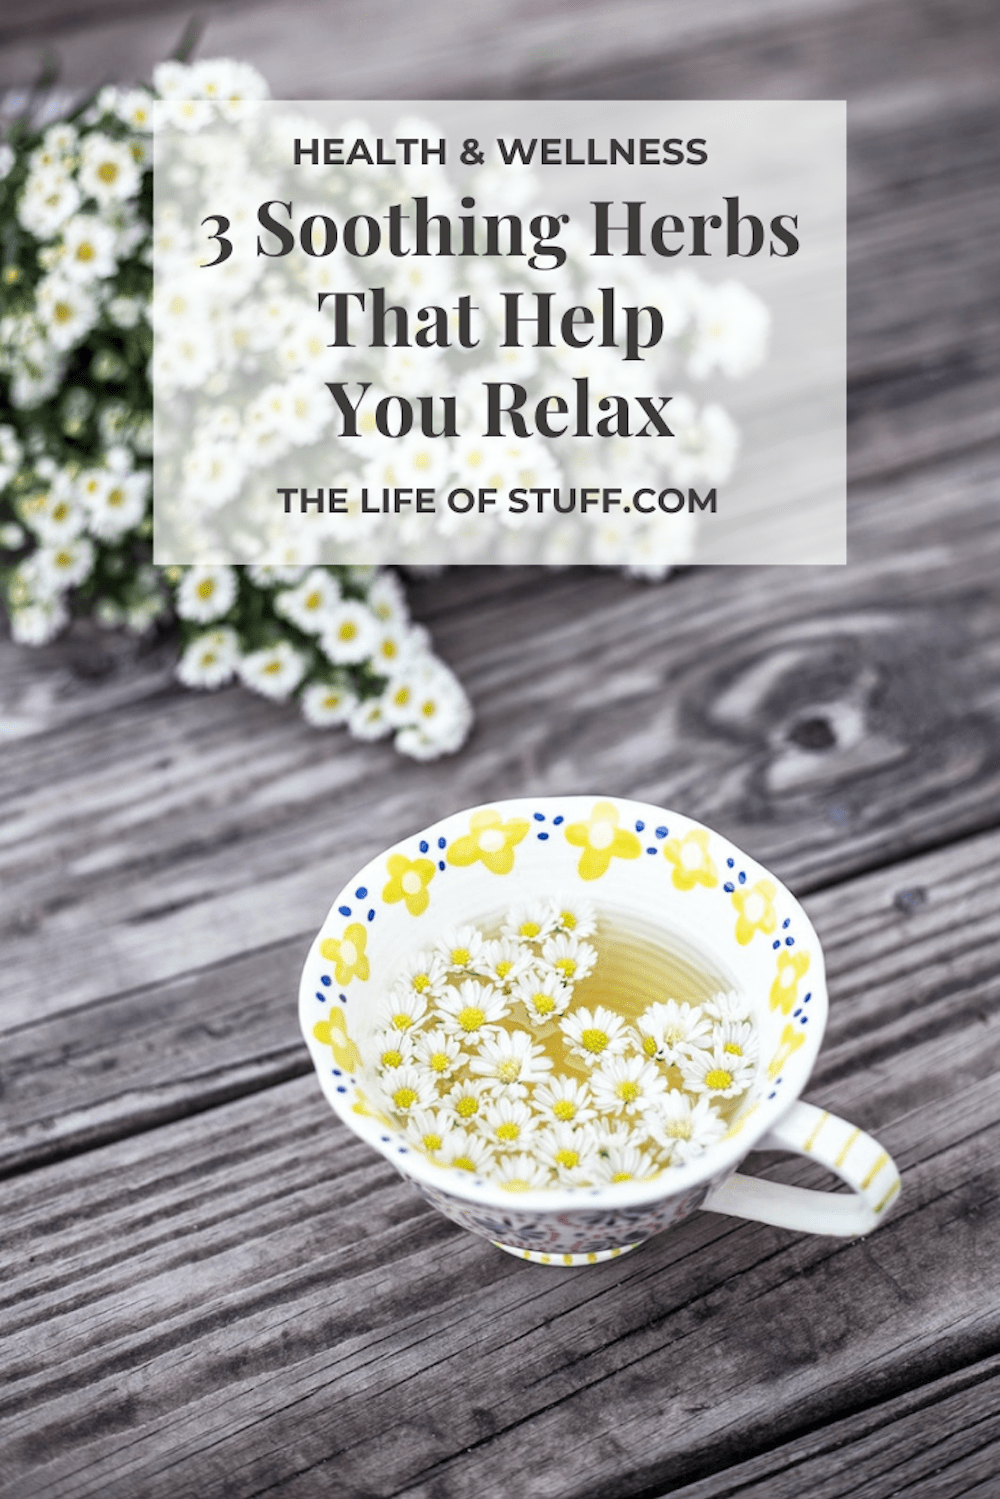 3 Soothing Herbs That Help You Relax - The Life of Stuff